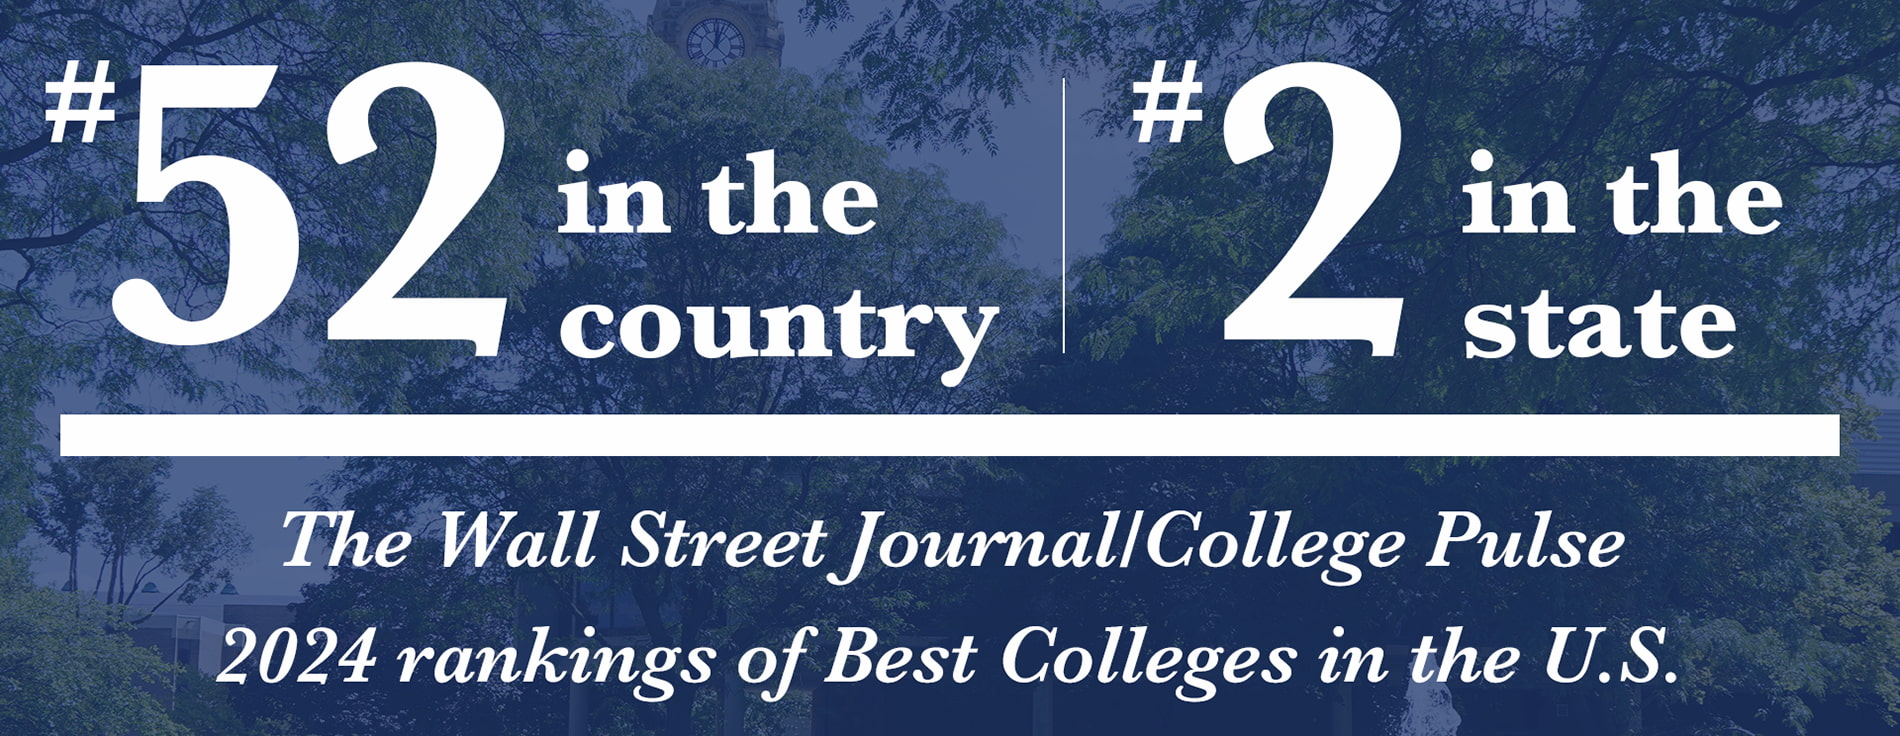 #52 in the country based on student outcomes. Wall Street Journal/College Pulse 2024 Best Colleges in the U.S.